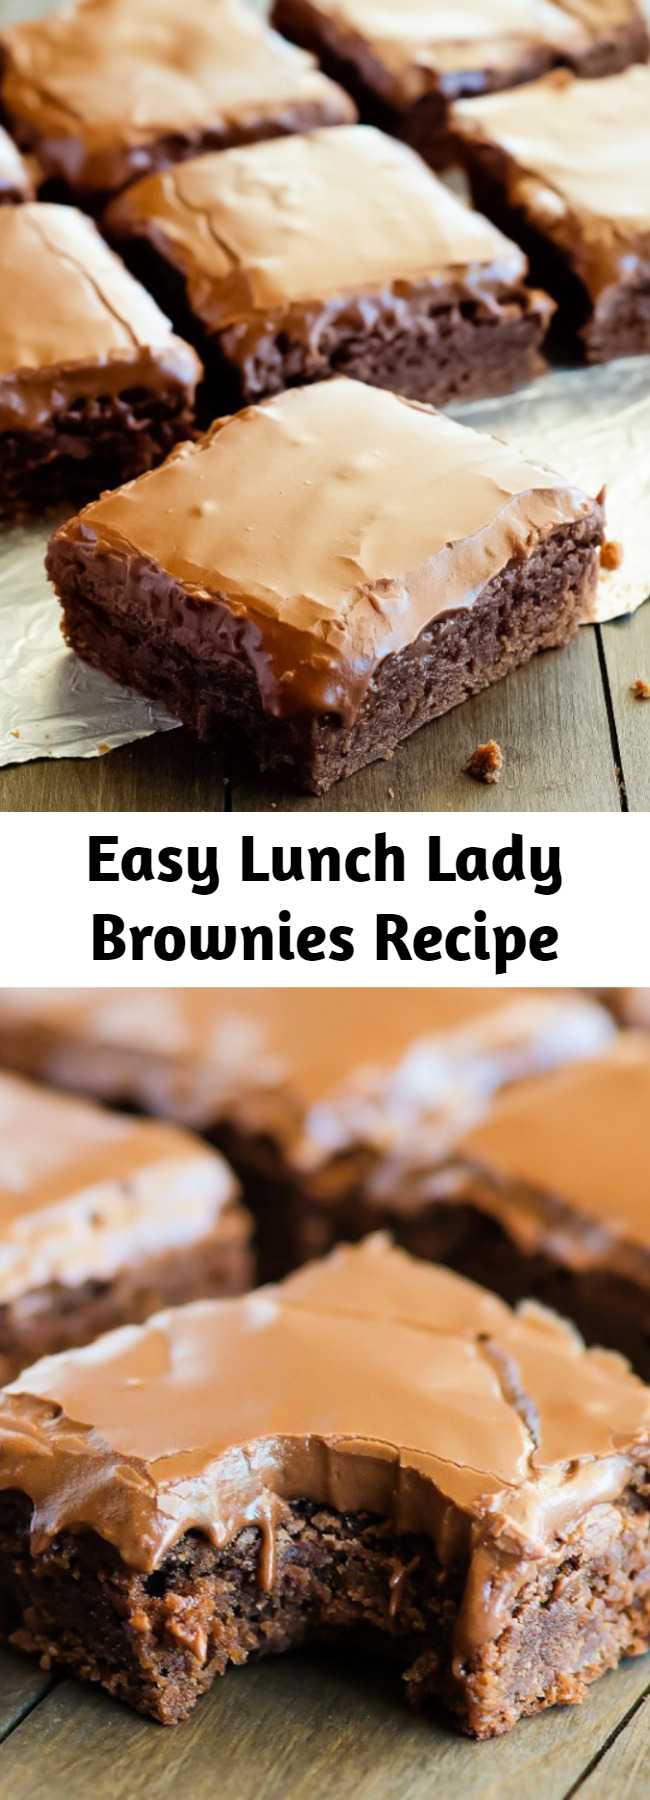 Easy Lunch Lady Brownies Recipe - Lunch Lady Brownies are moist, full of chocolate flavor and absolutely delicious. They’re like the ones the lunch ladies served for school lunch dessert, but I think this homemade version is better! This is the only brownie recipe you'll ever need!